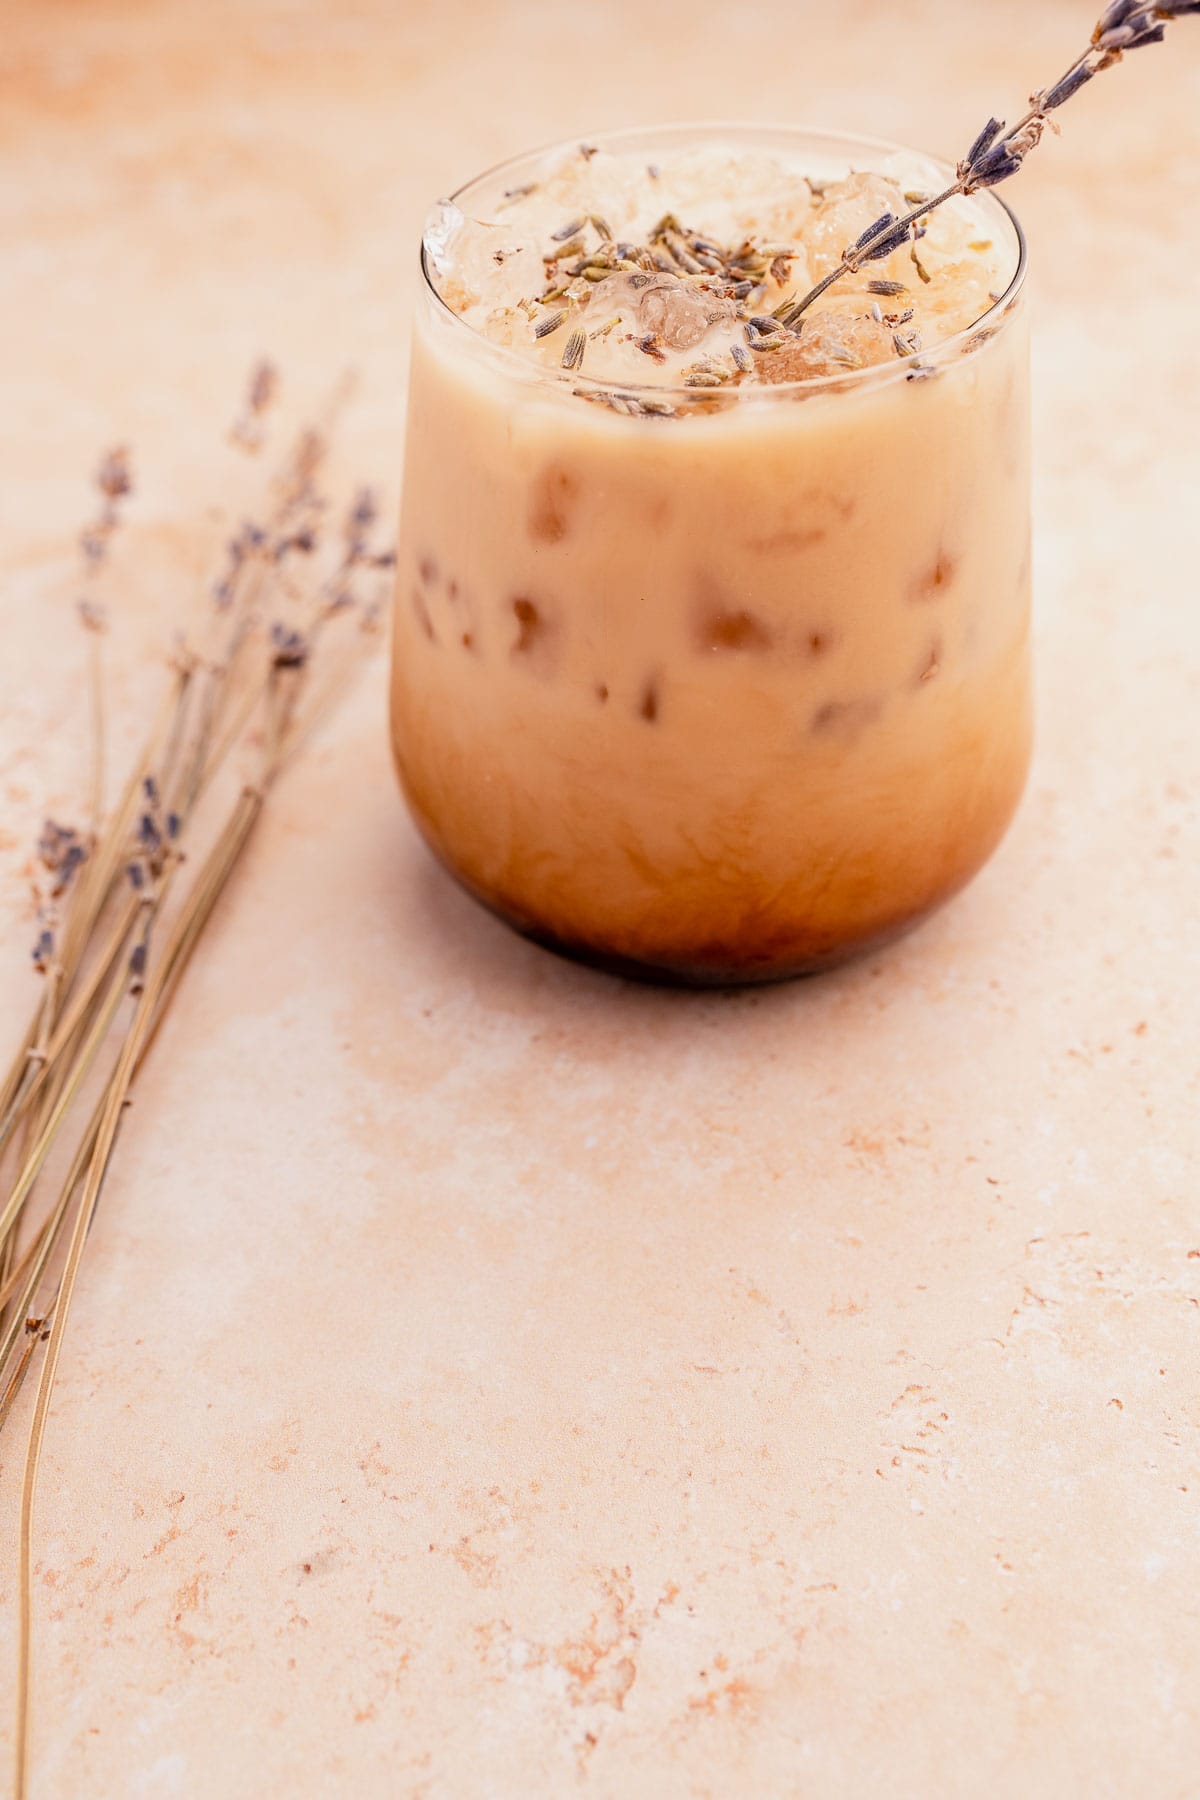 A glass of iced lavender oatmilk latte garnished with lavender on a beige surface, with dry lavender stems beside it.